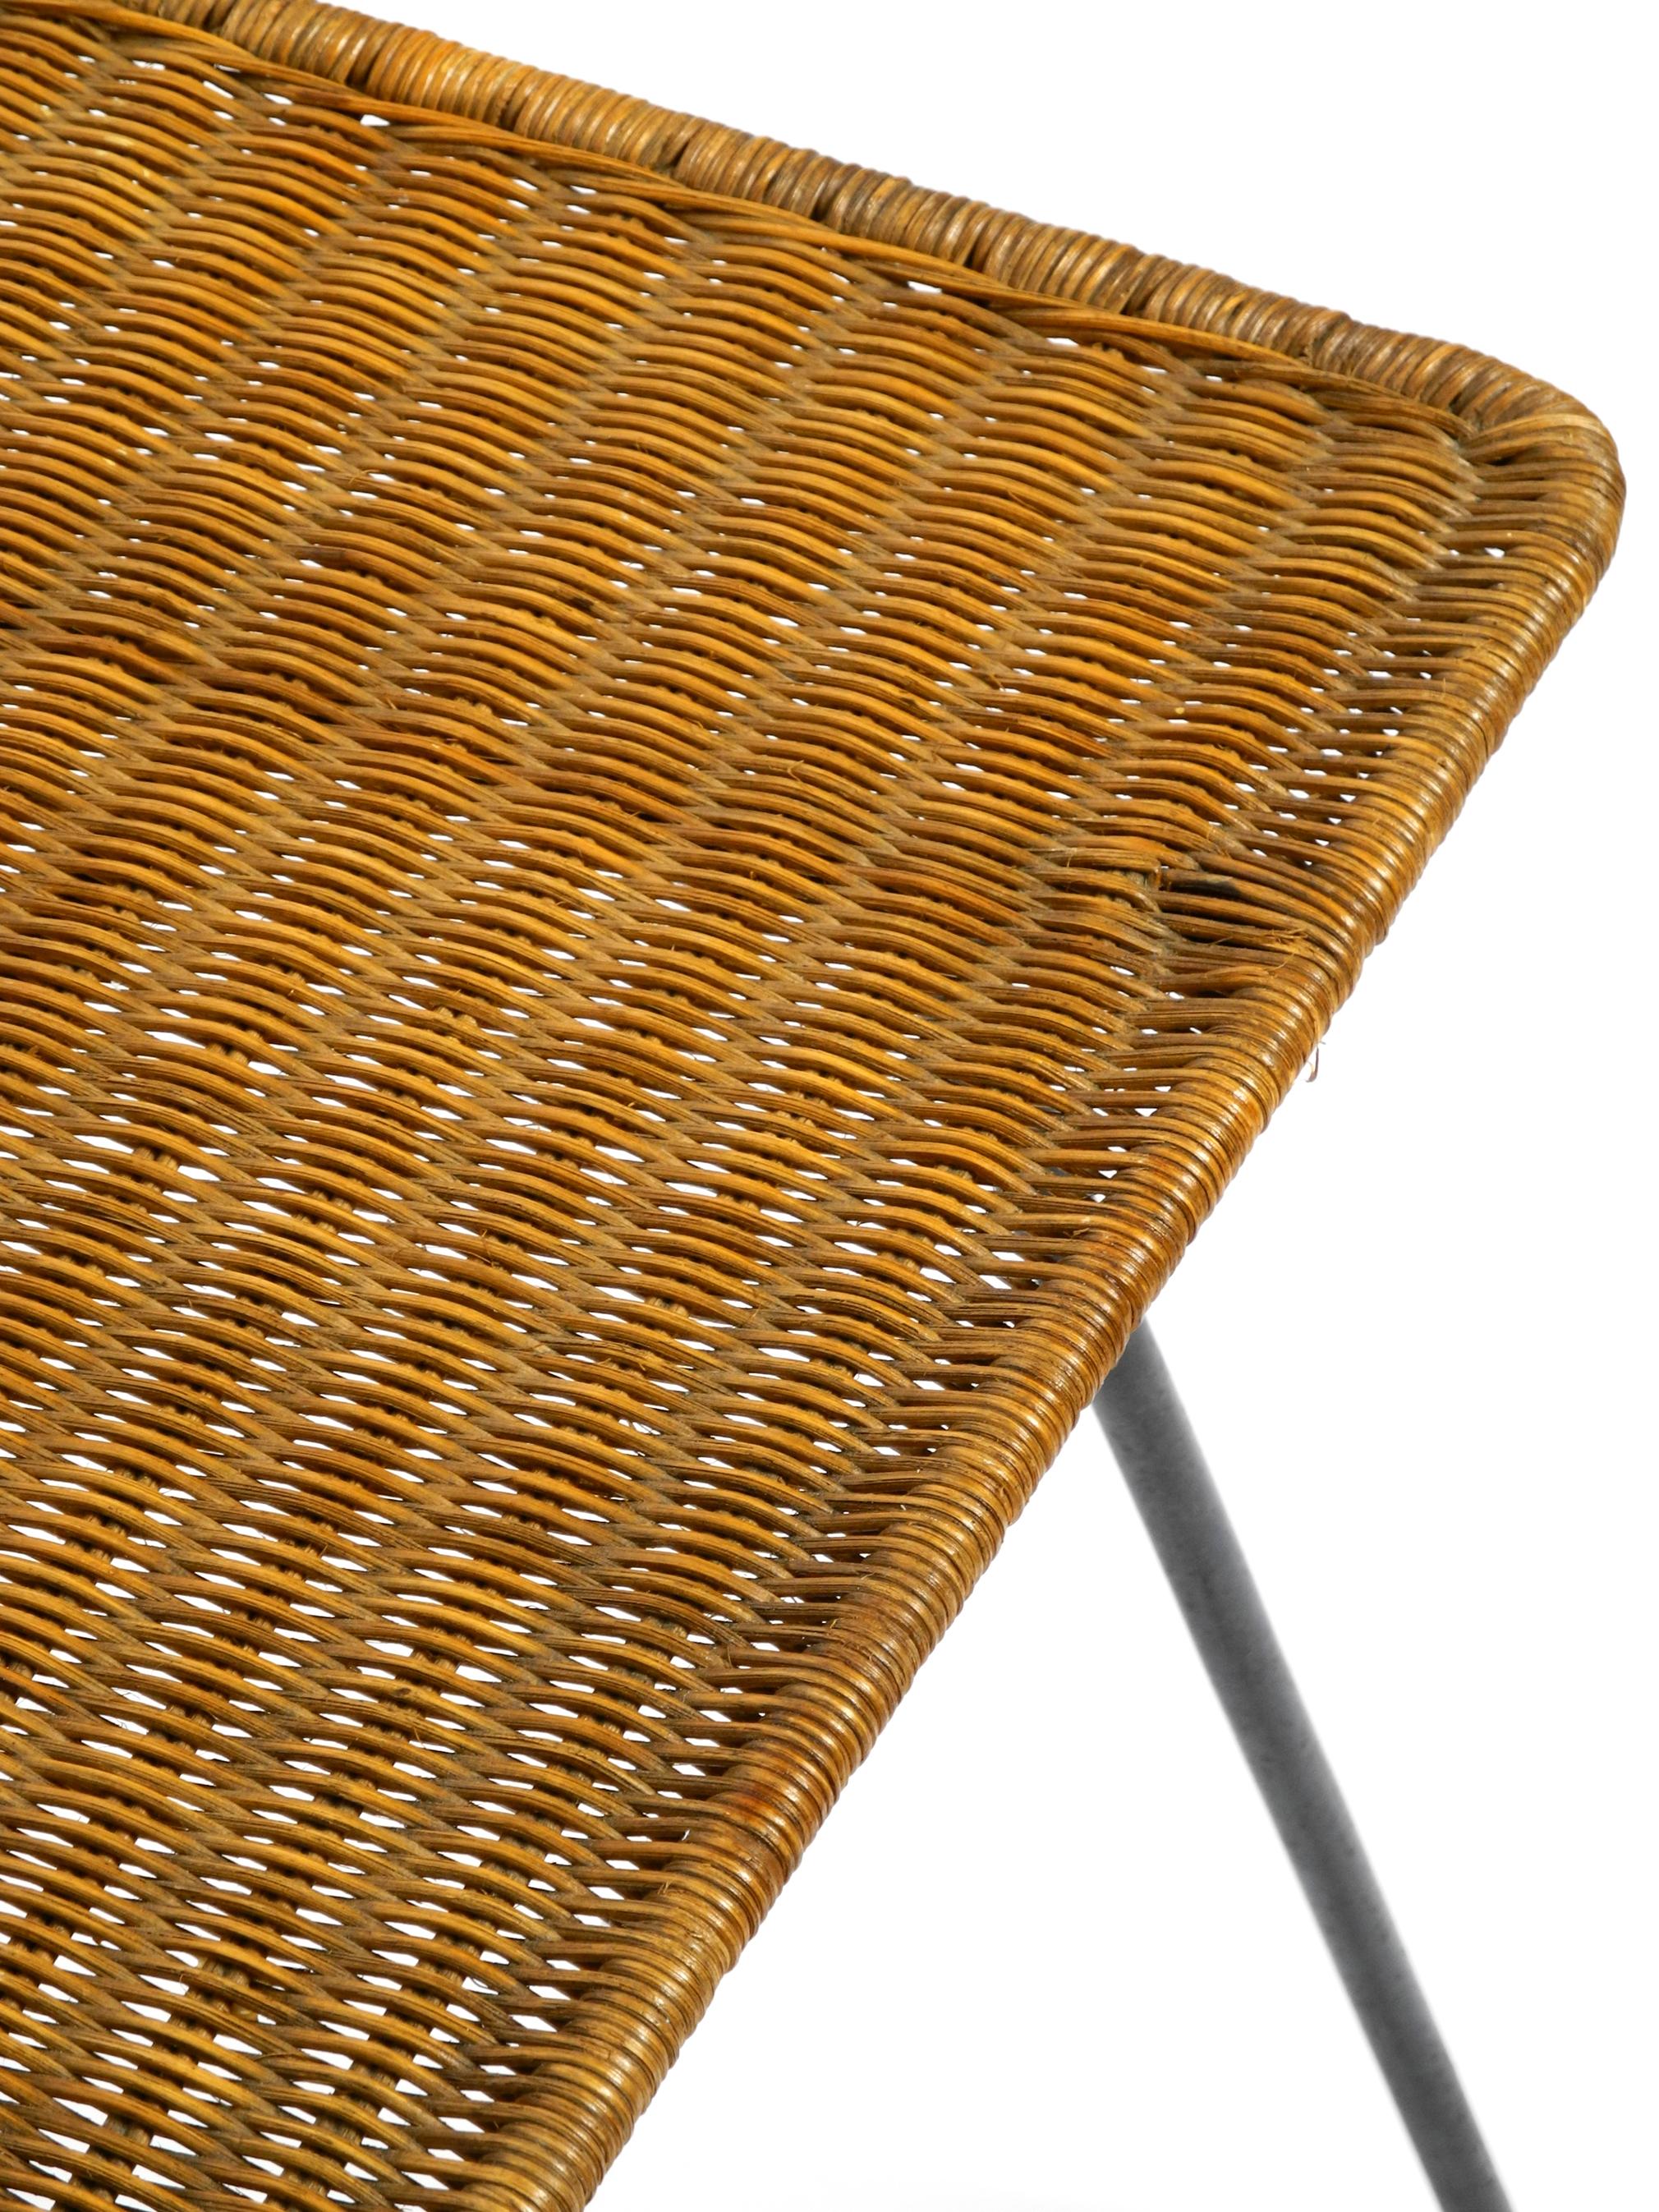 Italian Mid-Century Modern Rattan Side or Coffee Table with a Heavy Iron Frame For Sale 4